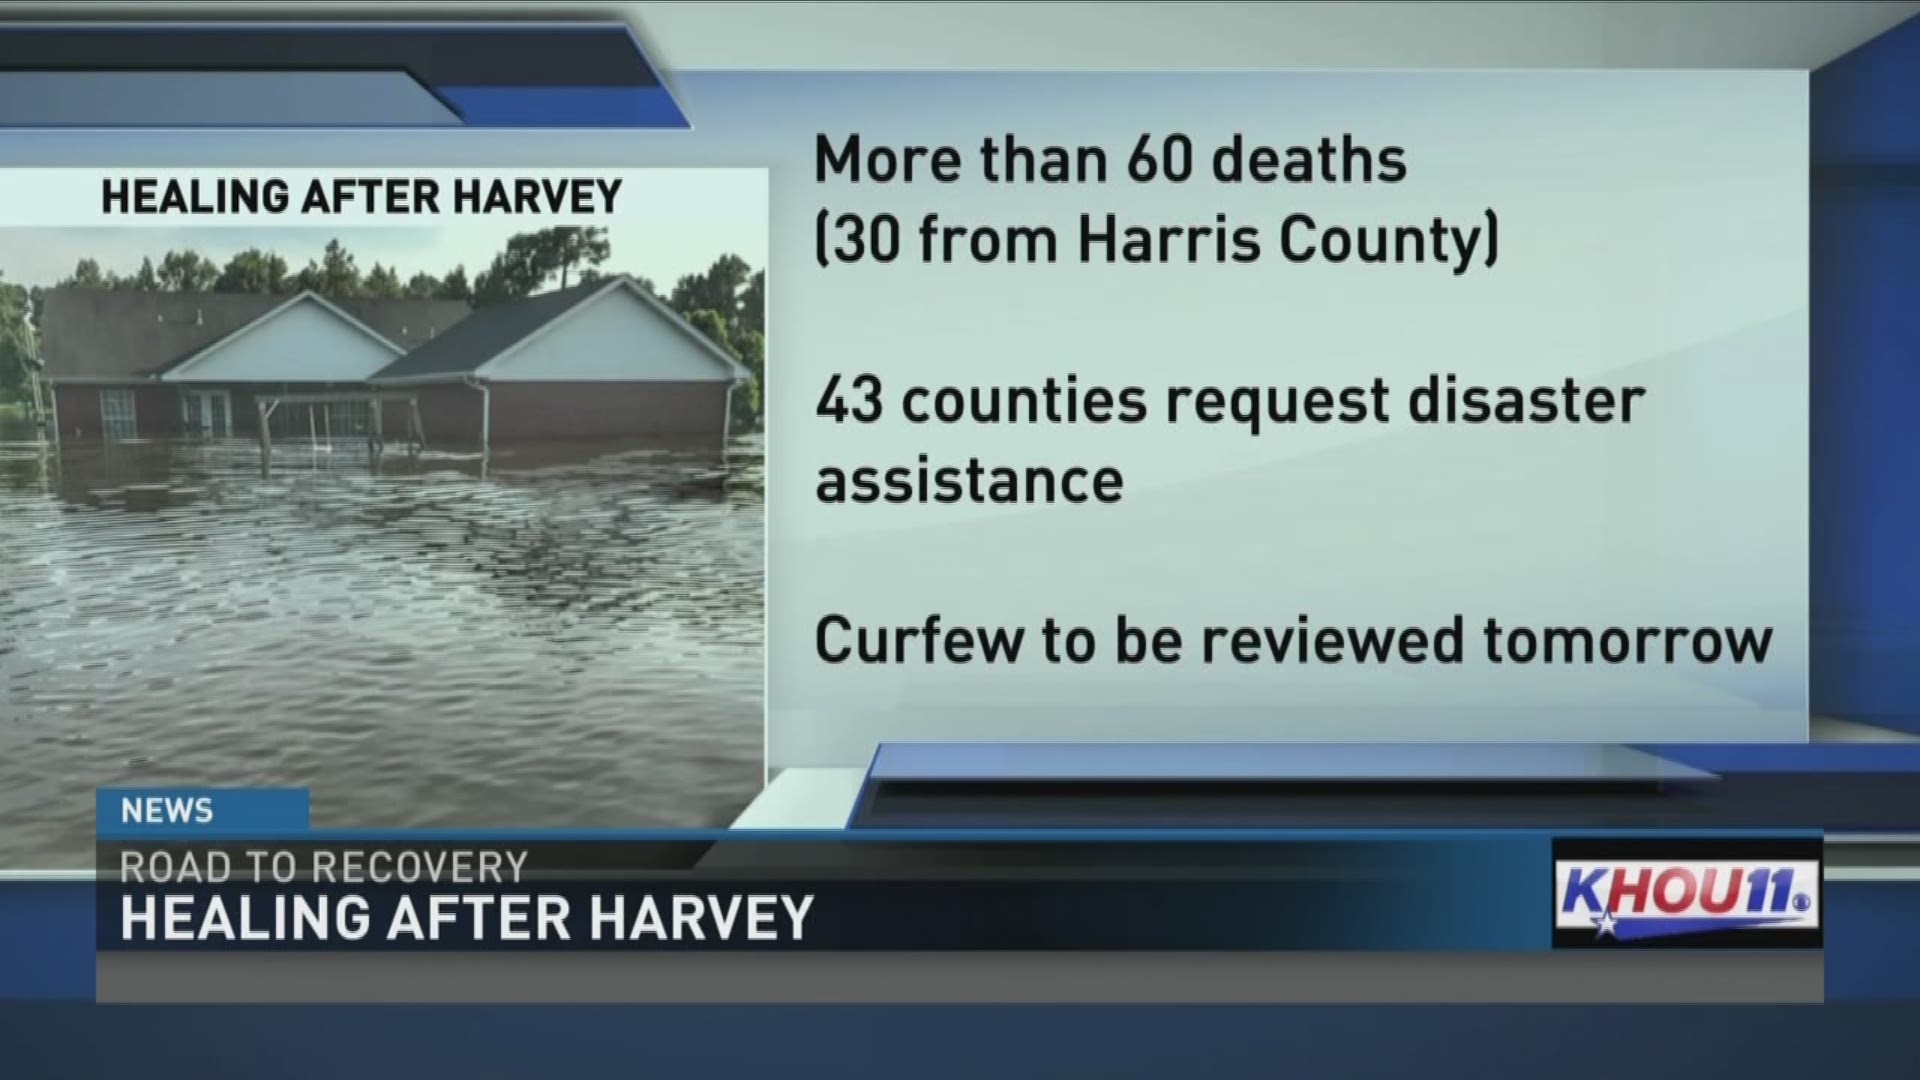 Officials now blame at least 60 deaths on Harvey after the storm dumped many feet of rain on several counties in a matter of days.